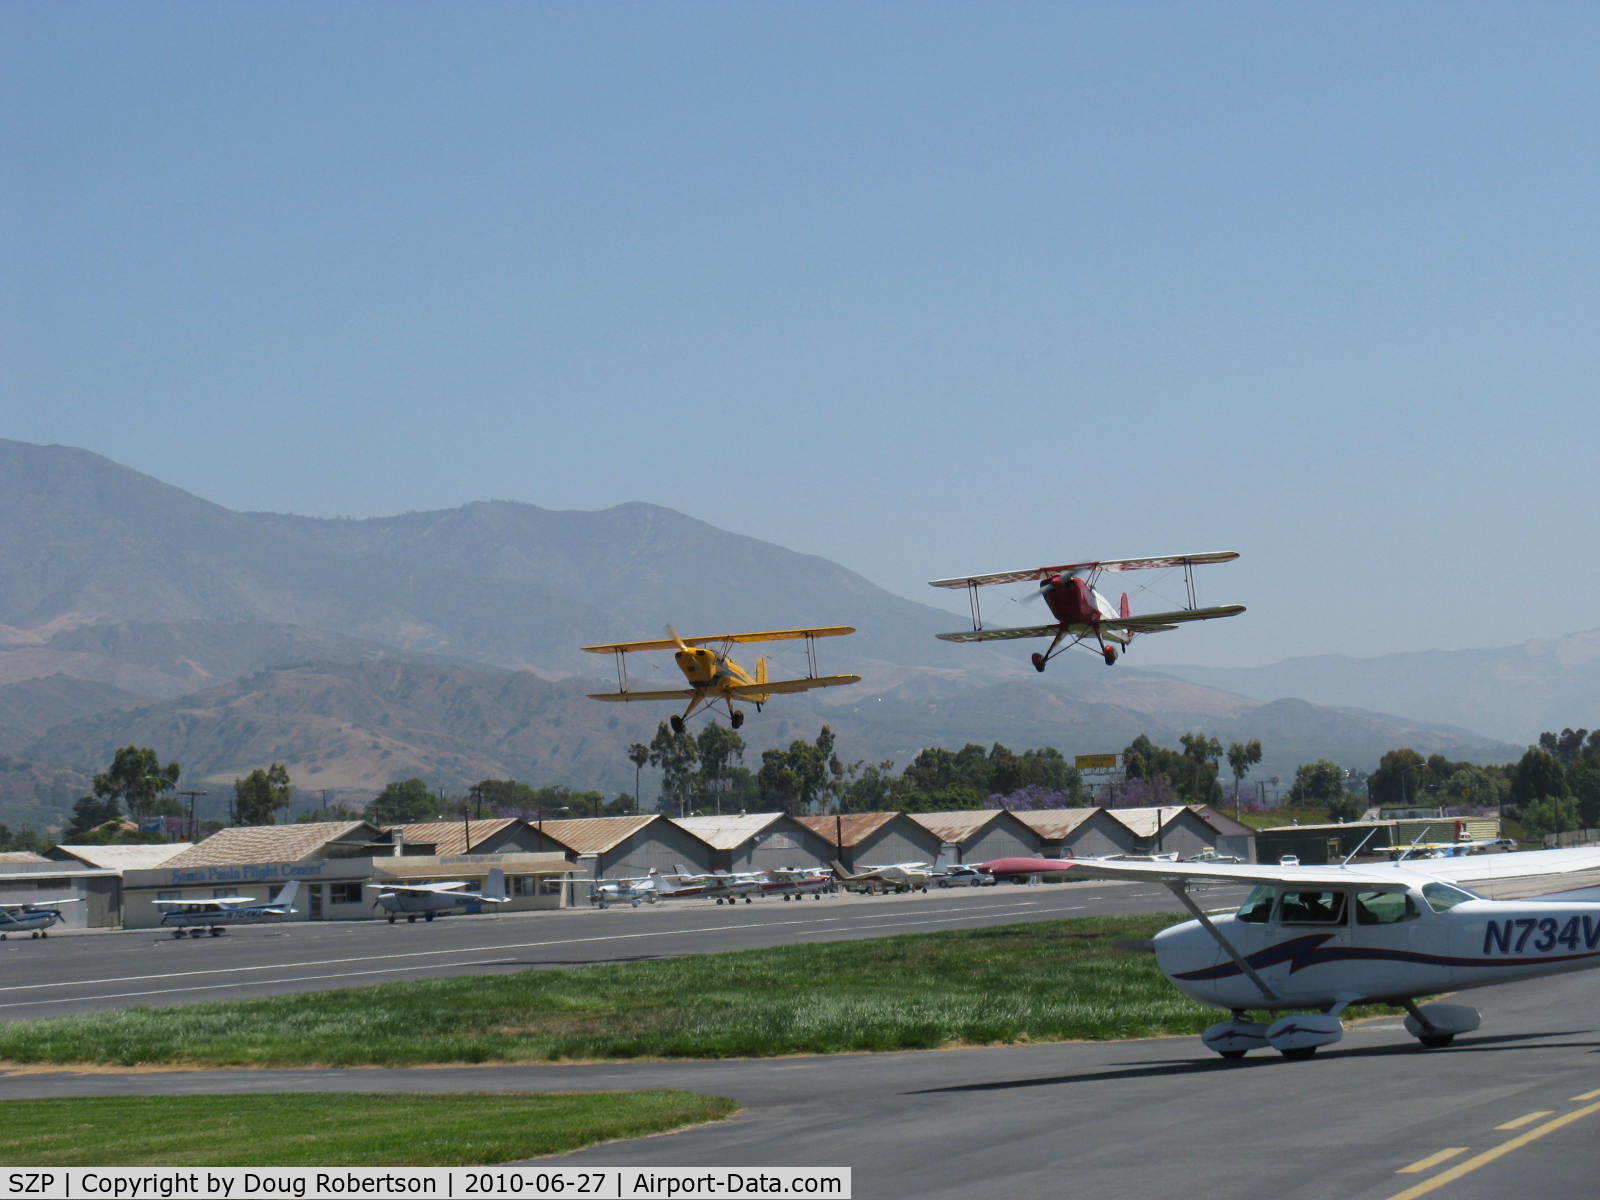 Santa Paula Airport (SZP) - N53EH and N3G in tandem takeoff Rwy 22 at the National Bucker Fly-In